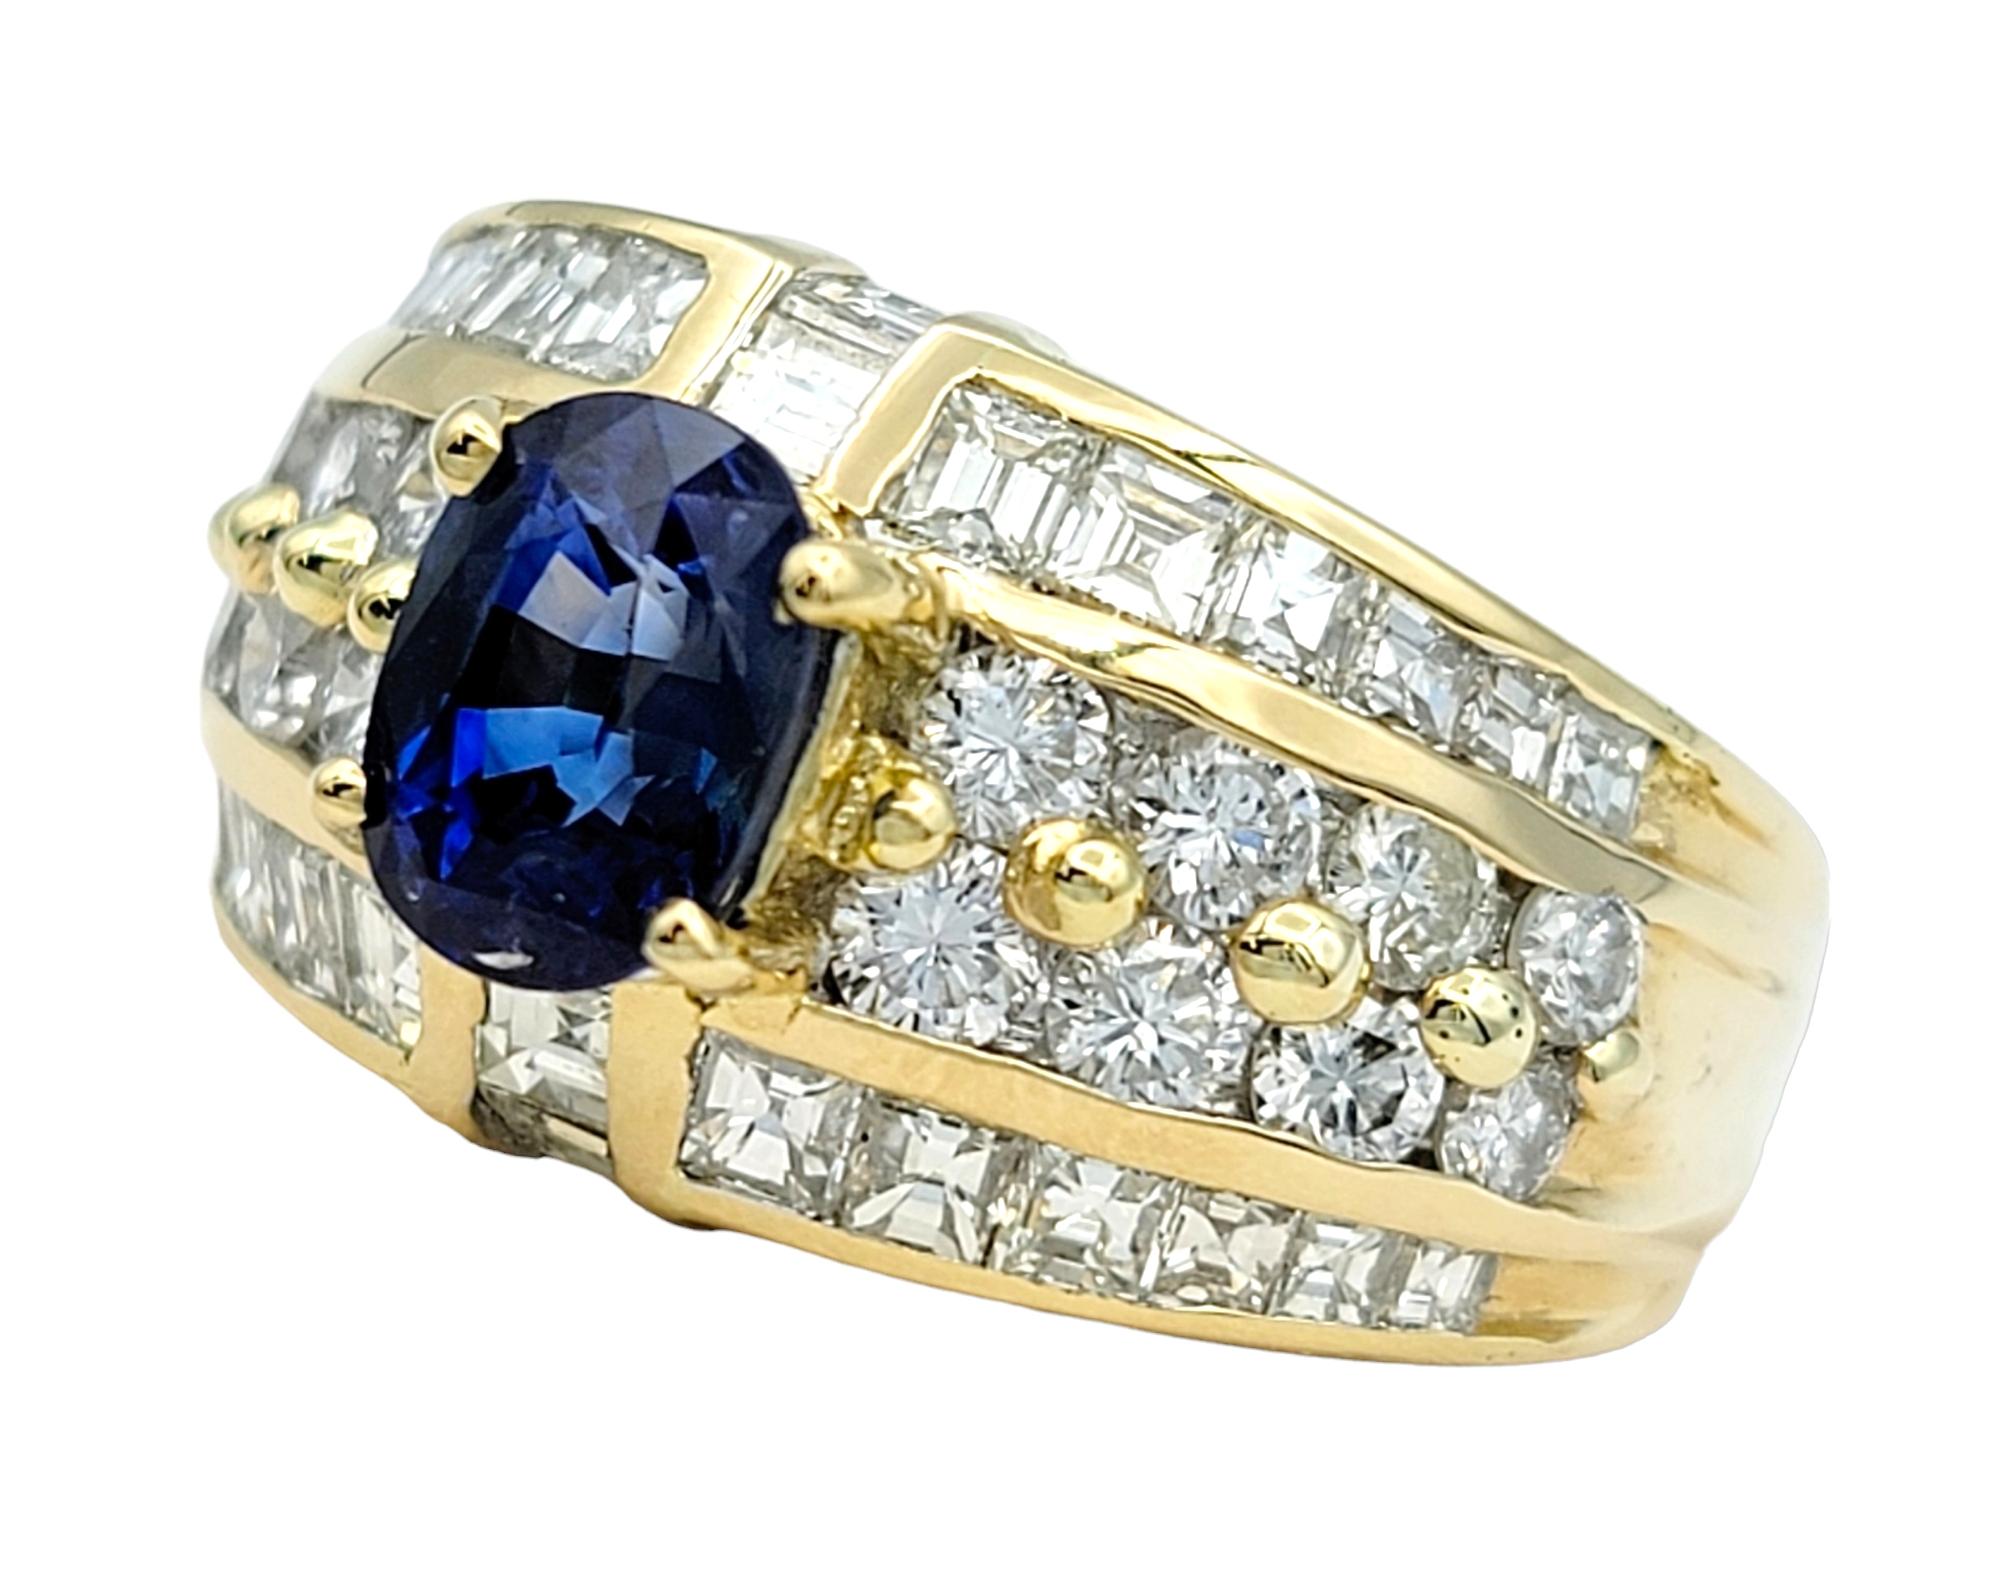 Cushion Cut Blue Sapphire and Multi-Row Diamond Band Ring 18 Karat Yellow Gold In Good Condition For Sale In Scottsdale, AZ